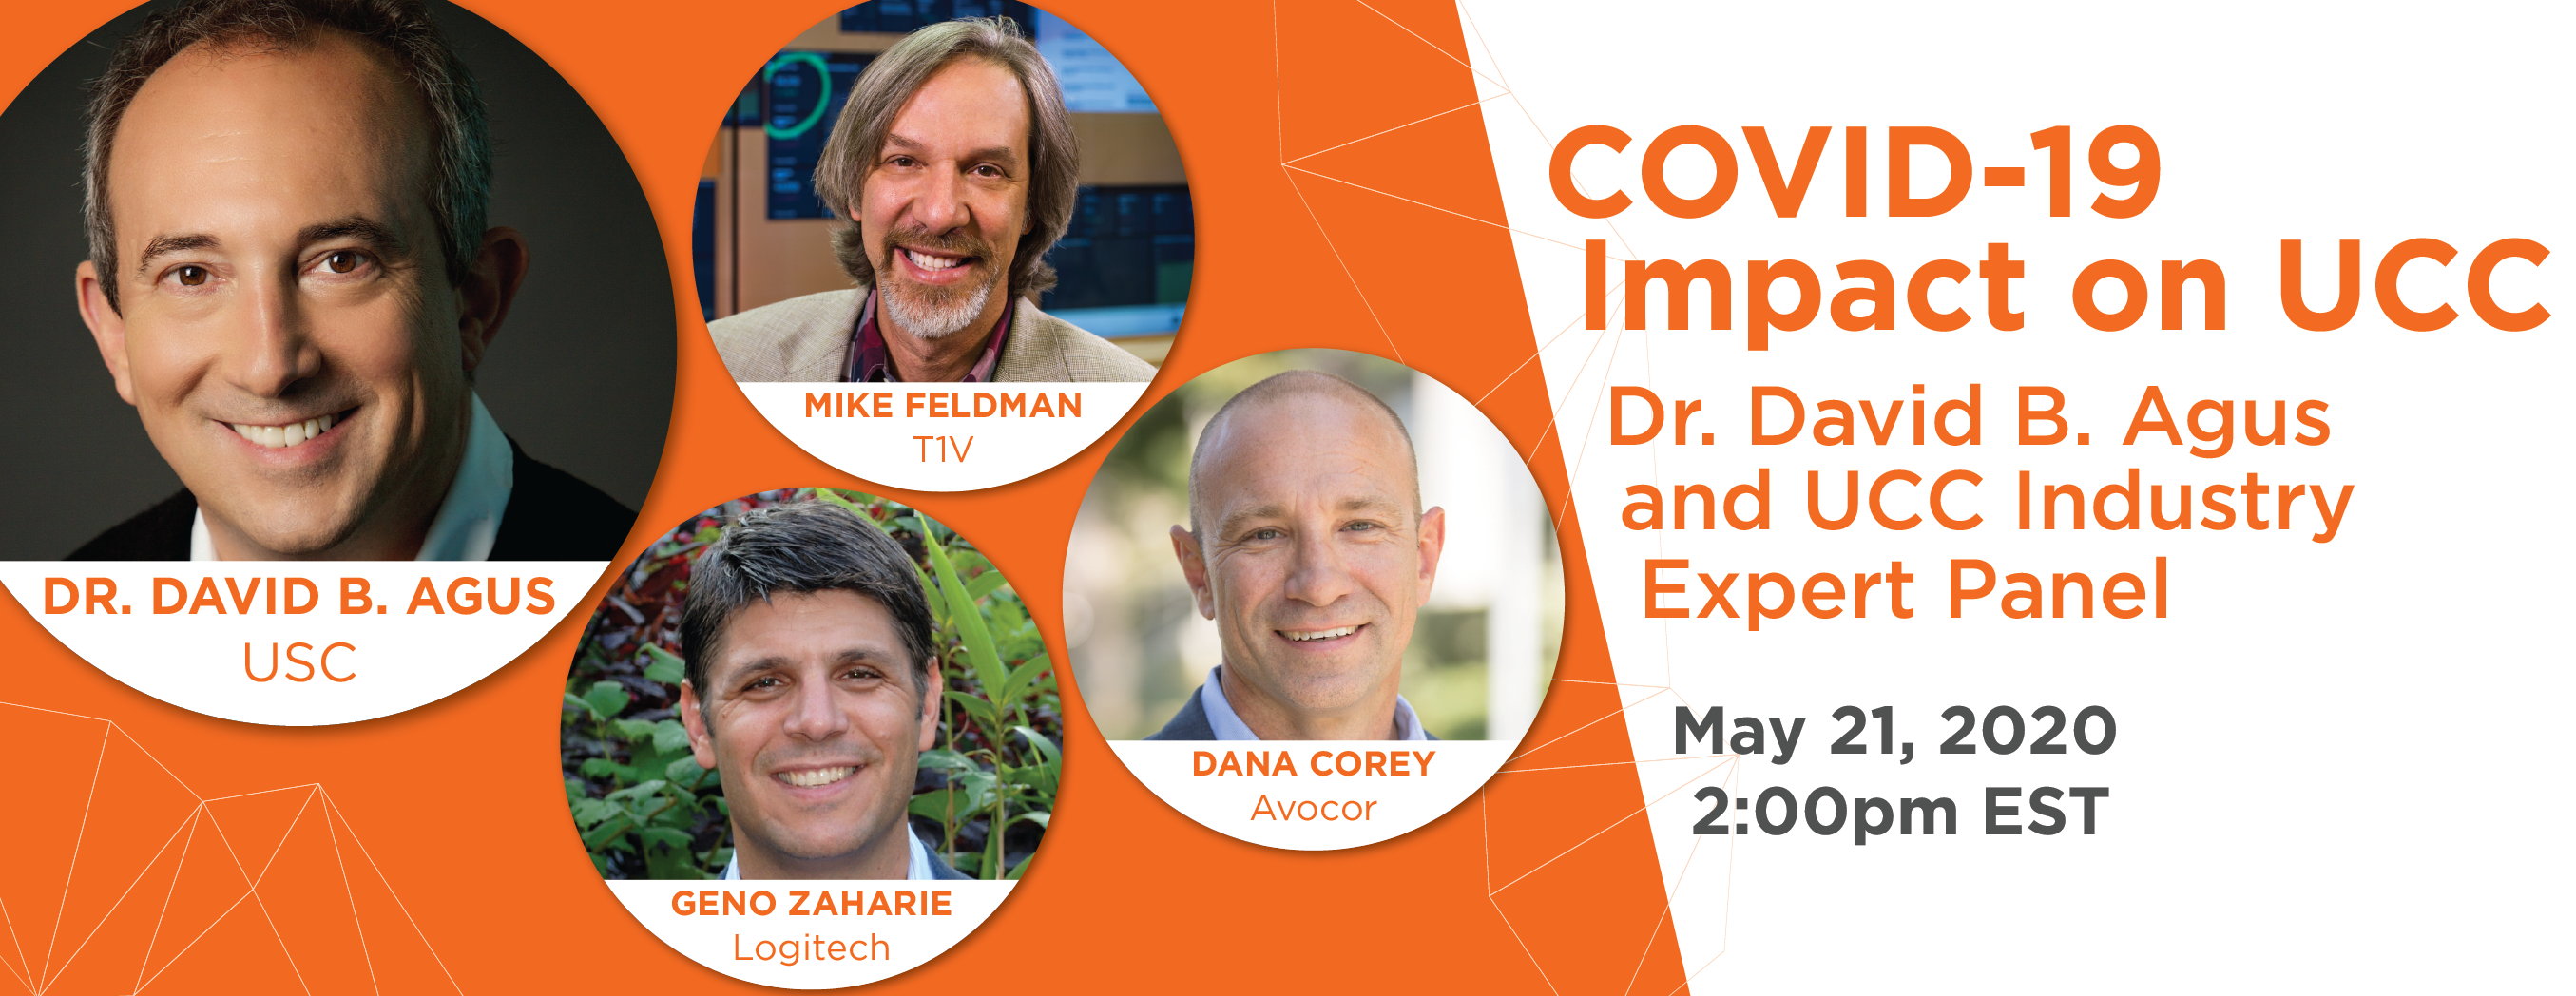 t1v-covid-19-impact-on-ucc-with-dr-david-agus-and-ucc-industry-expert-panel-email-graphic